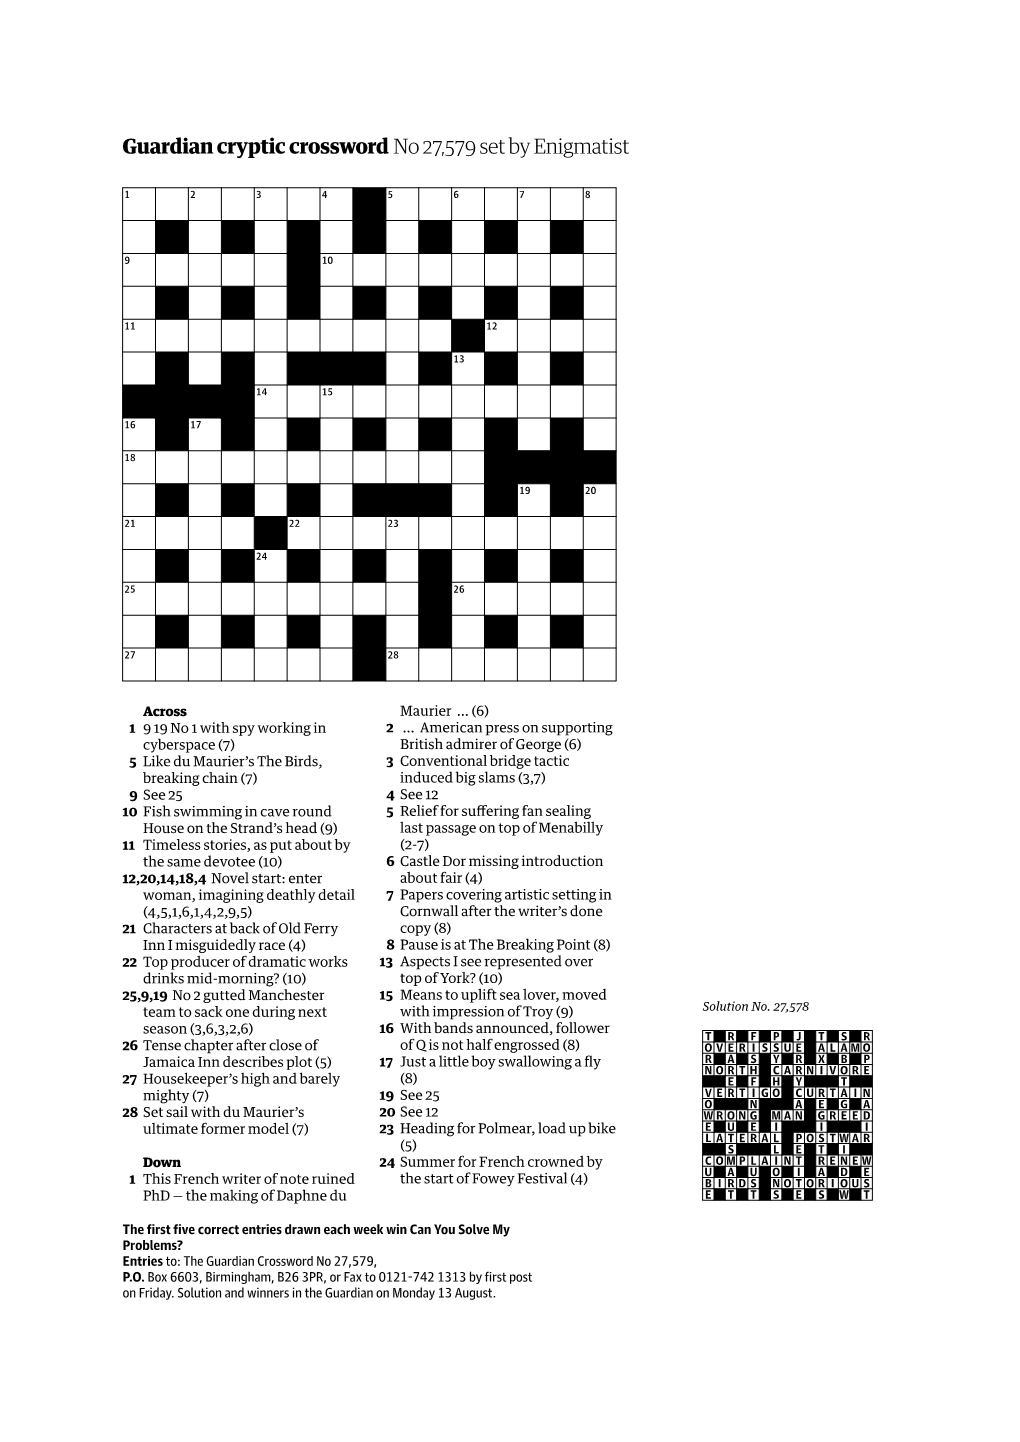 Guardian Cryptic Crossword No 27,579 Set by Enigmatist